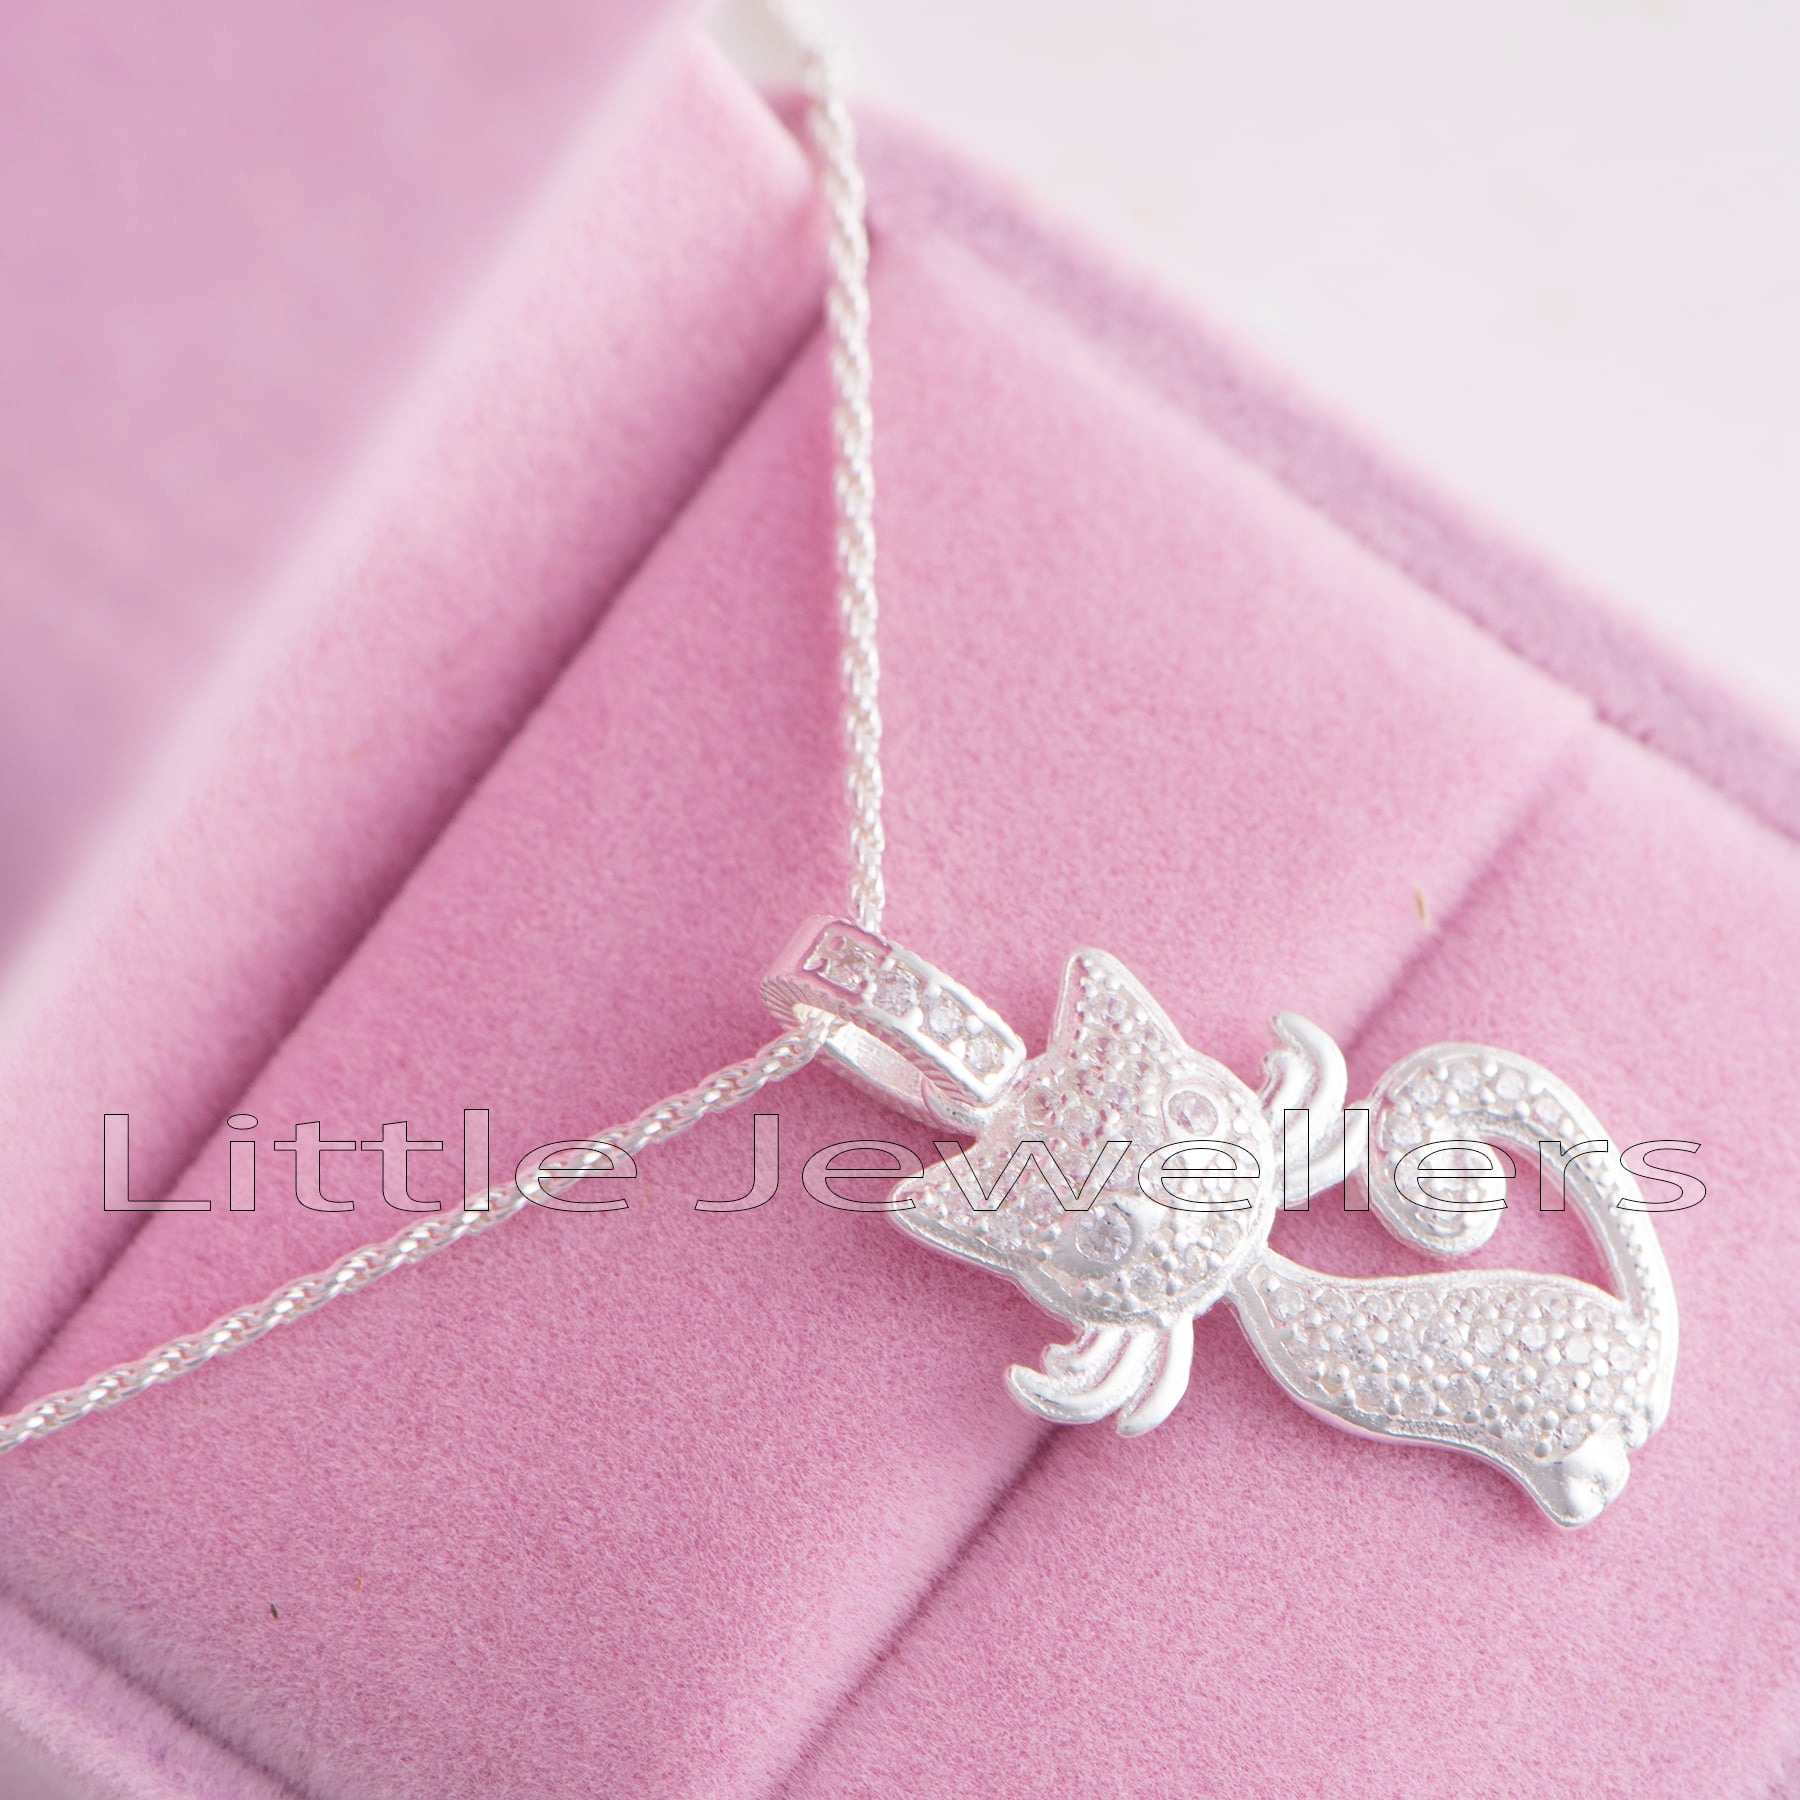 A lovely kitty pendant necklace that has been handcrafted with care. To appeal to all cat enthusiasts.